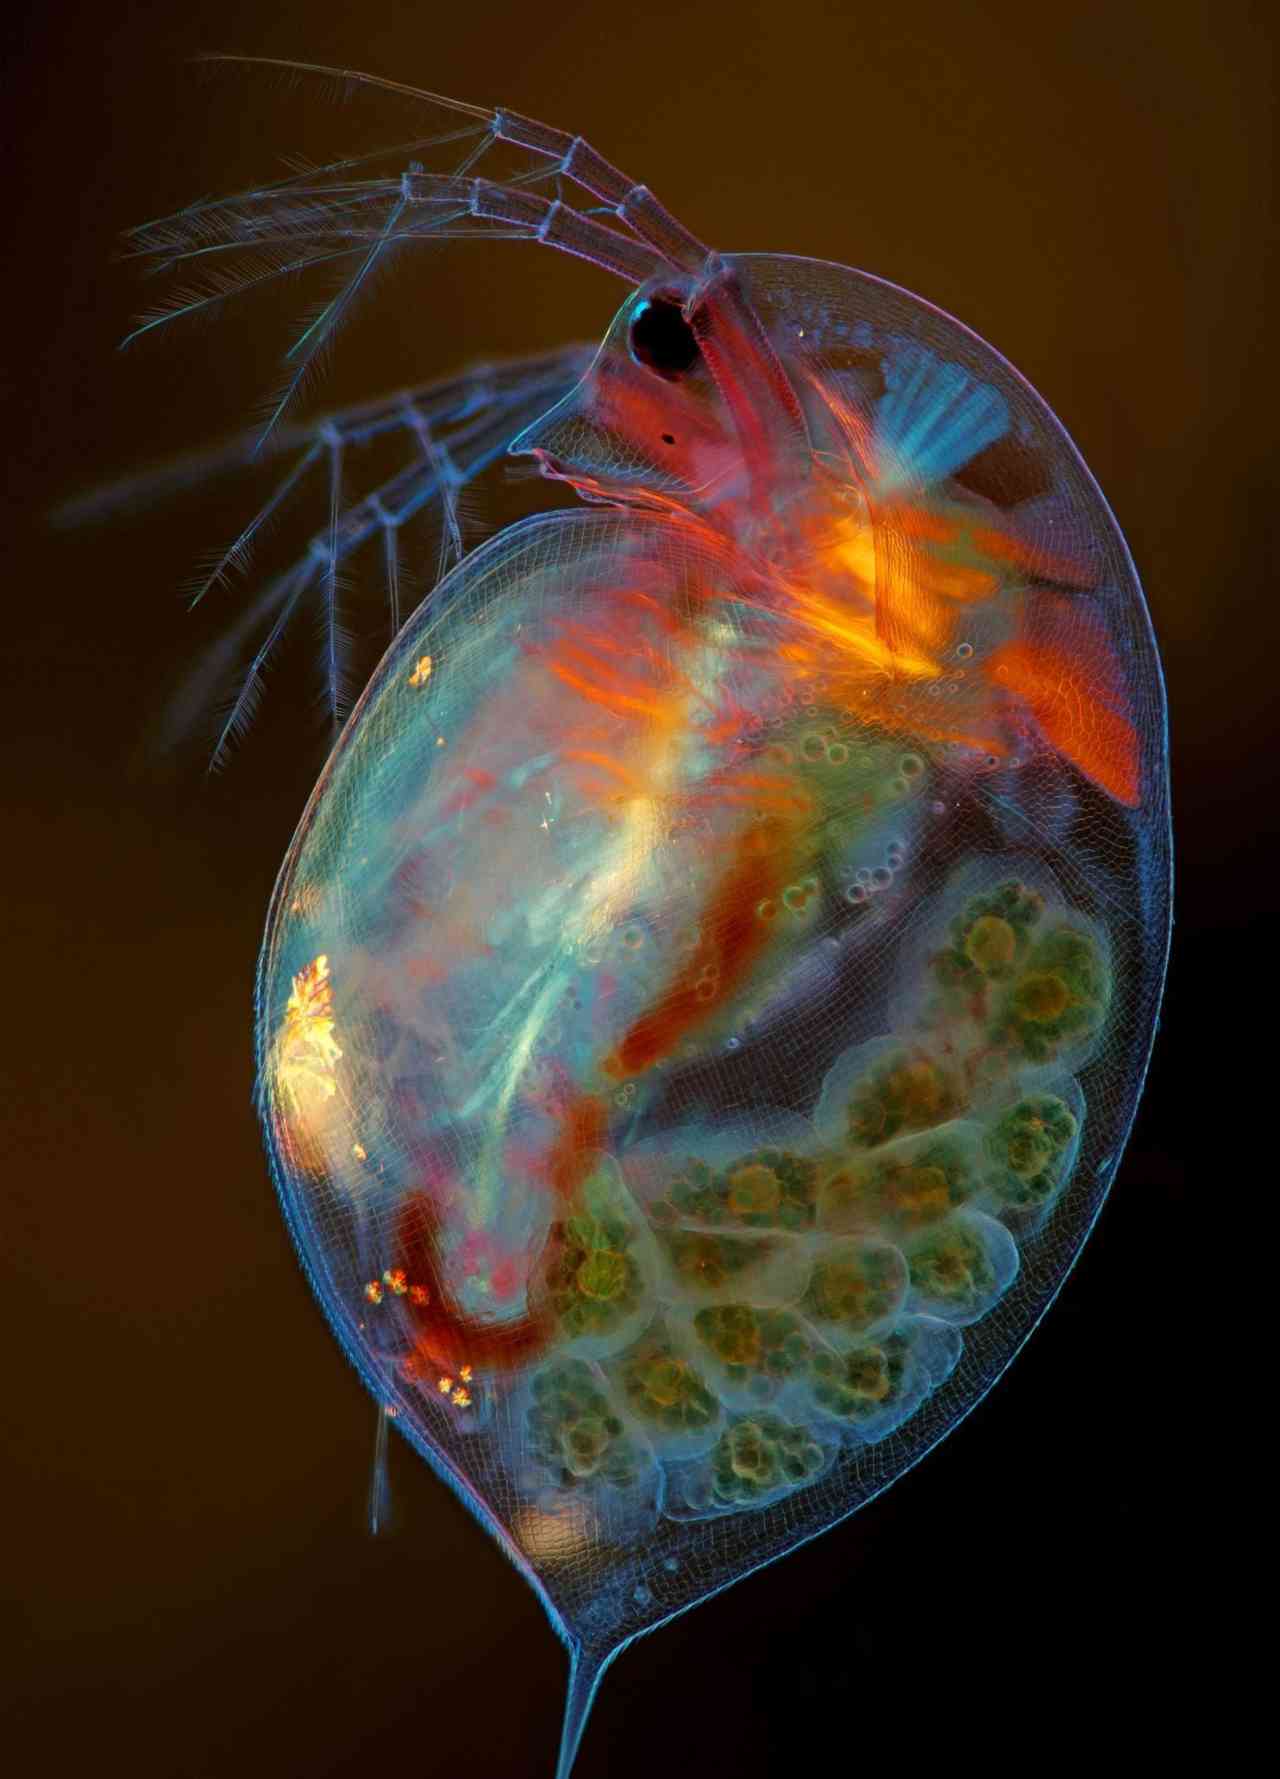 At 15th place, a pregnant, small plankton (crustacean) from the Daphnia magna species. Image credit: Marek Mis/Nikon Small World